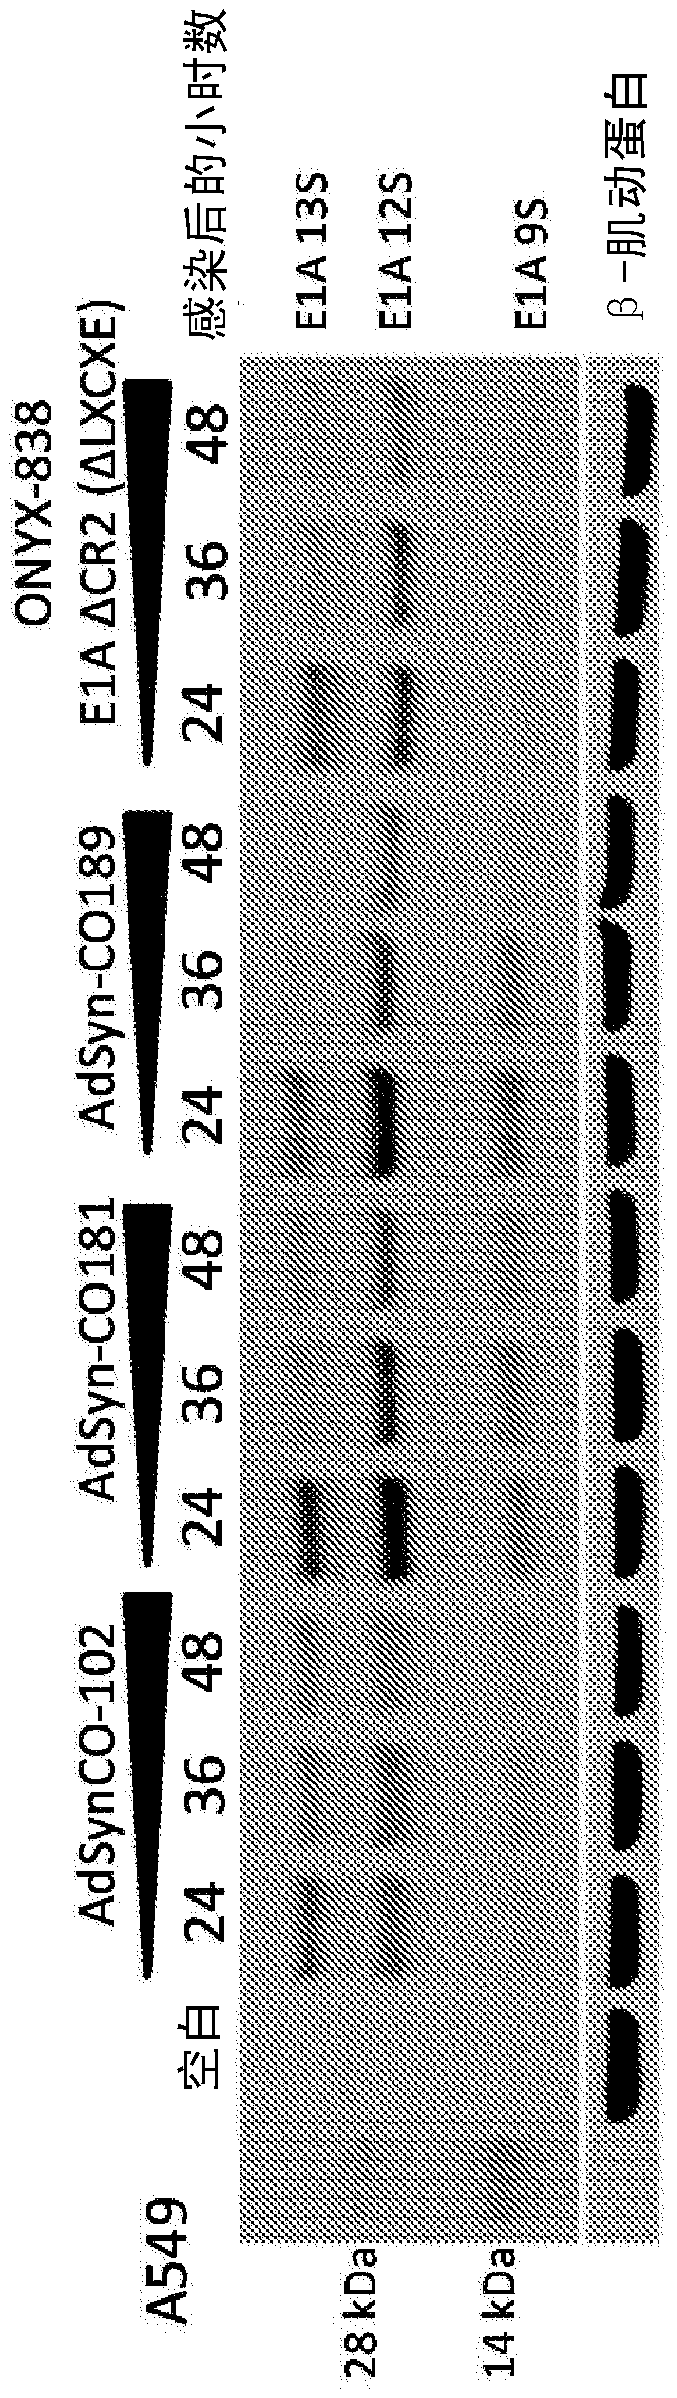 Oncolytic tumor viruses and methods of use